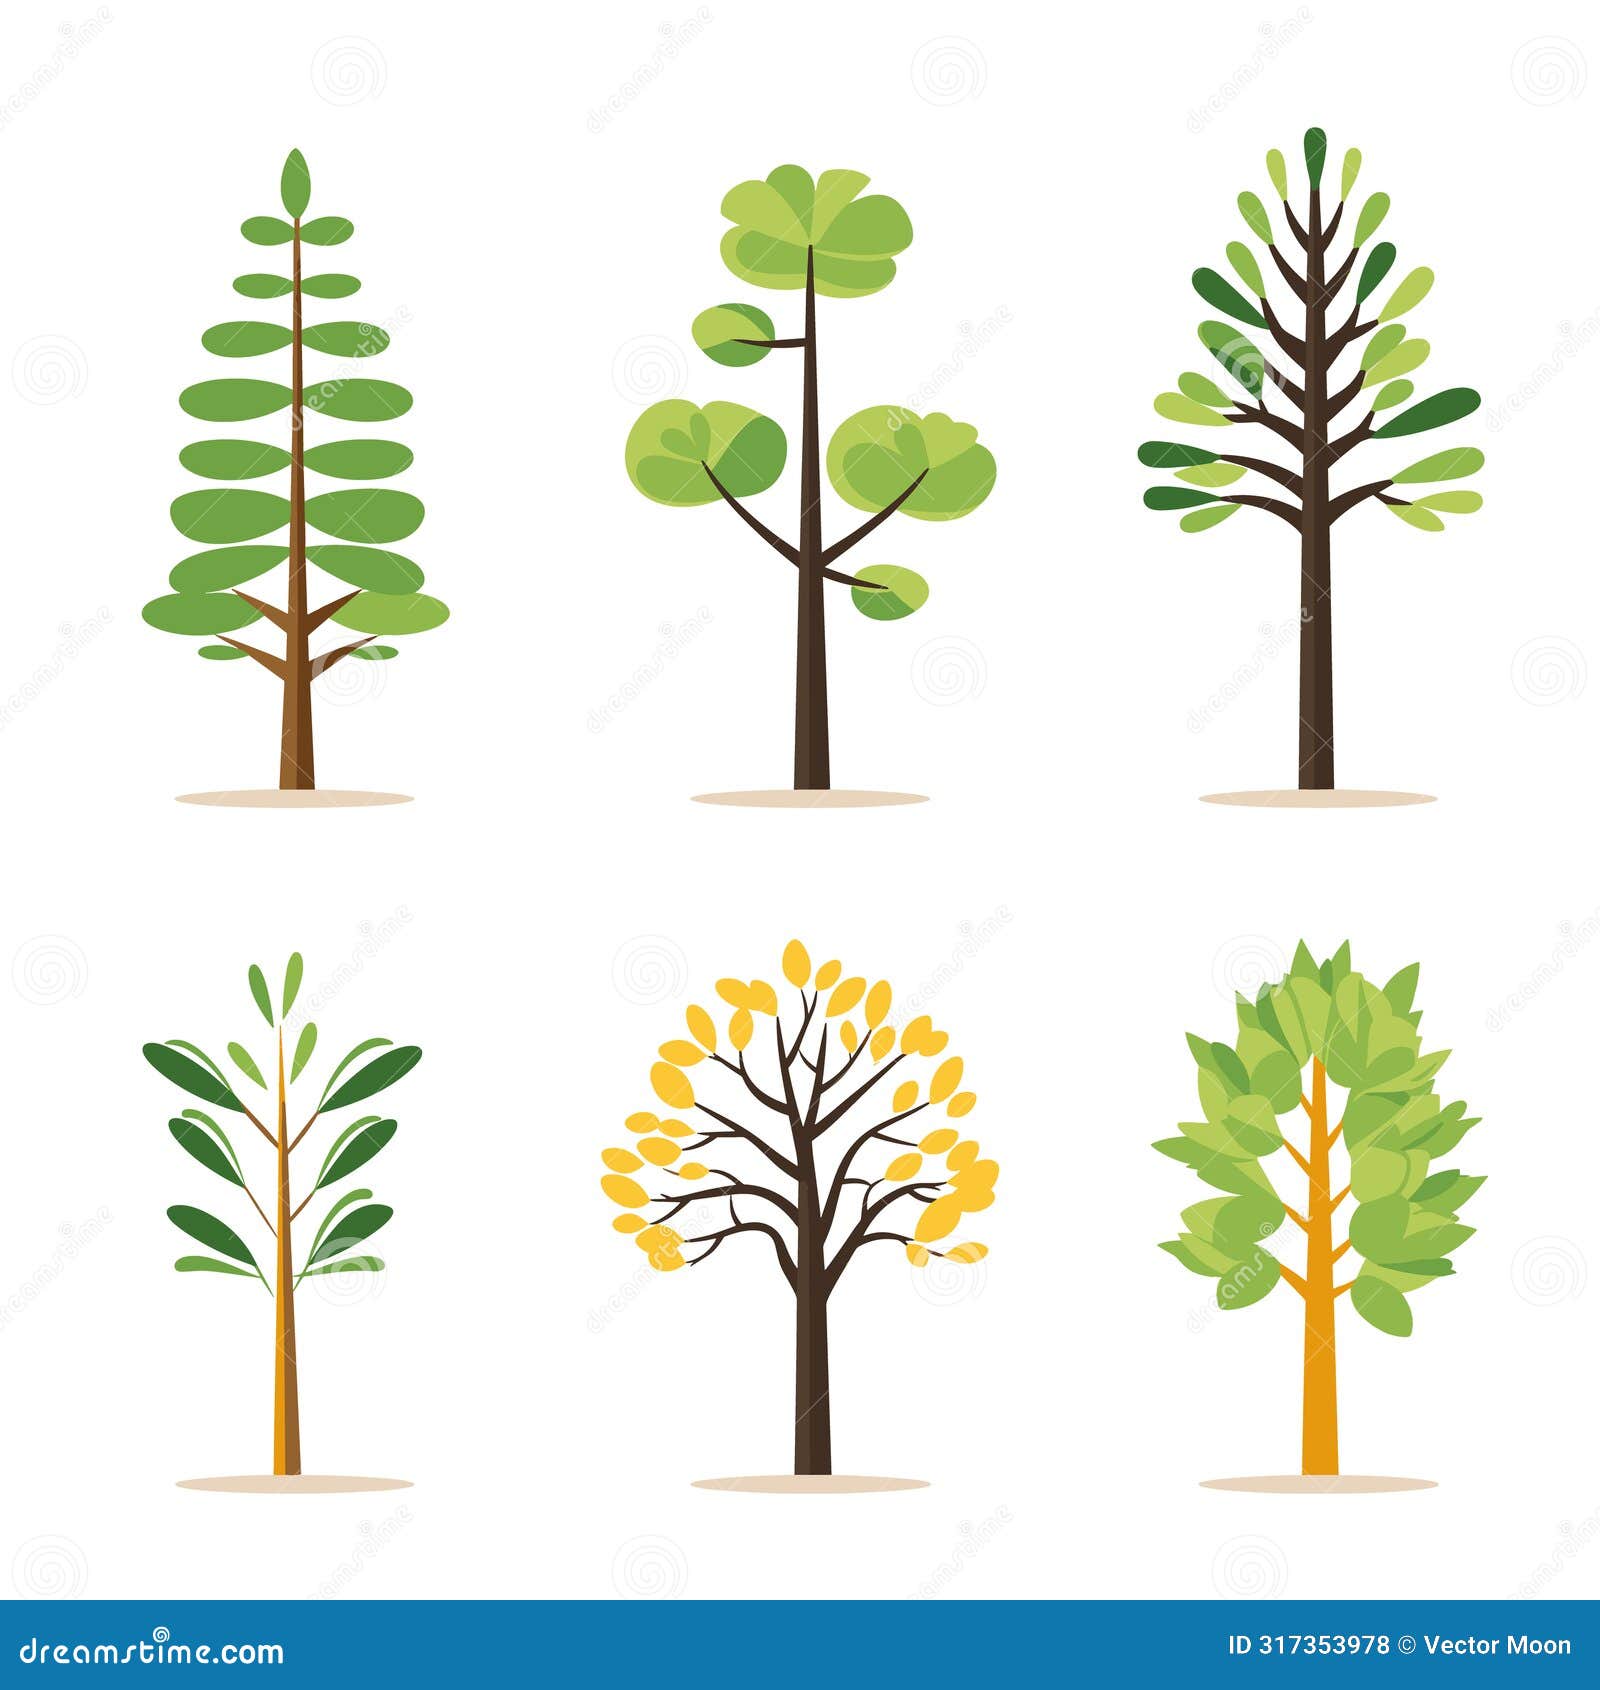 six different cartoon trees varying leaf s colors represent changing seasons. trees